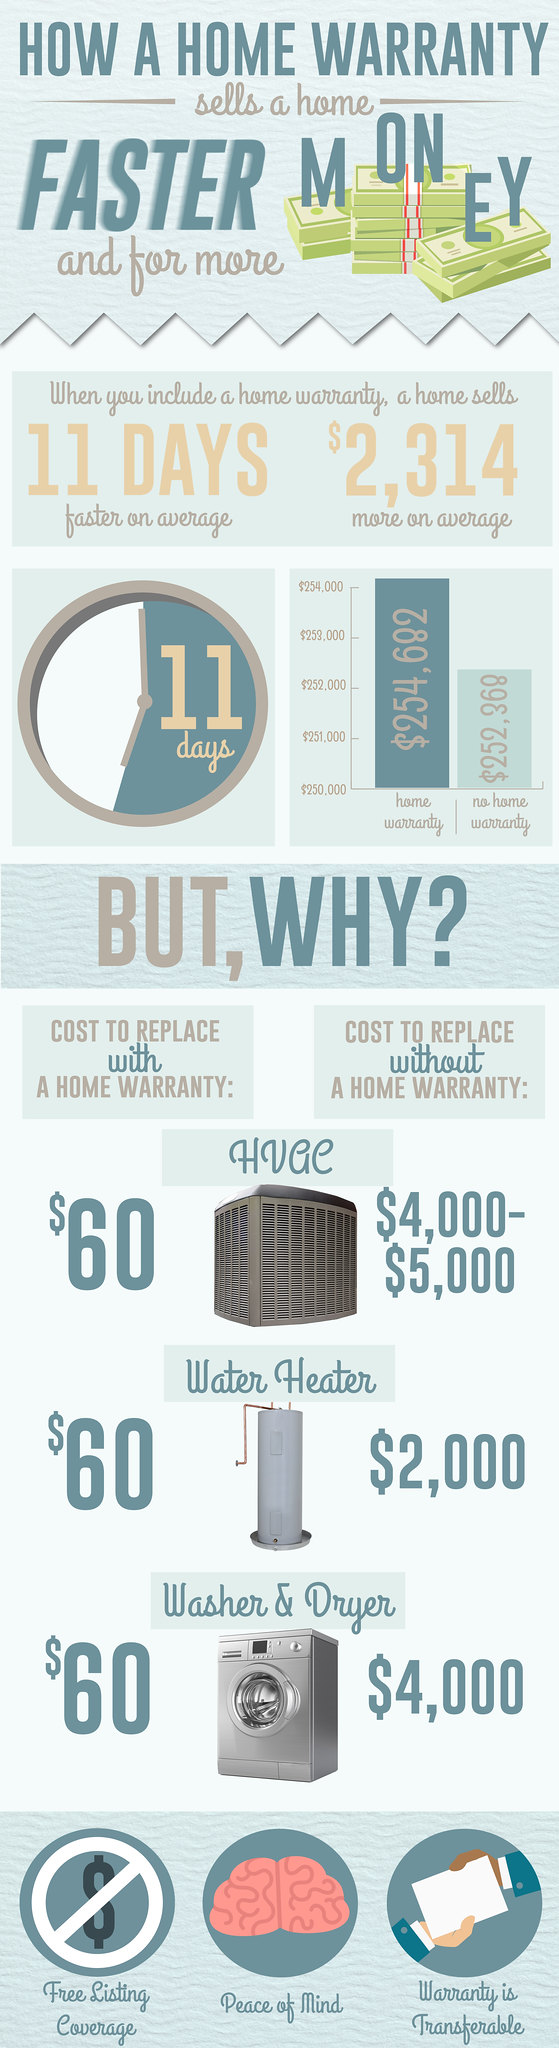 how a home warranty sells a home faster for more money